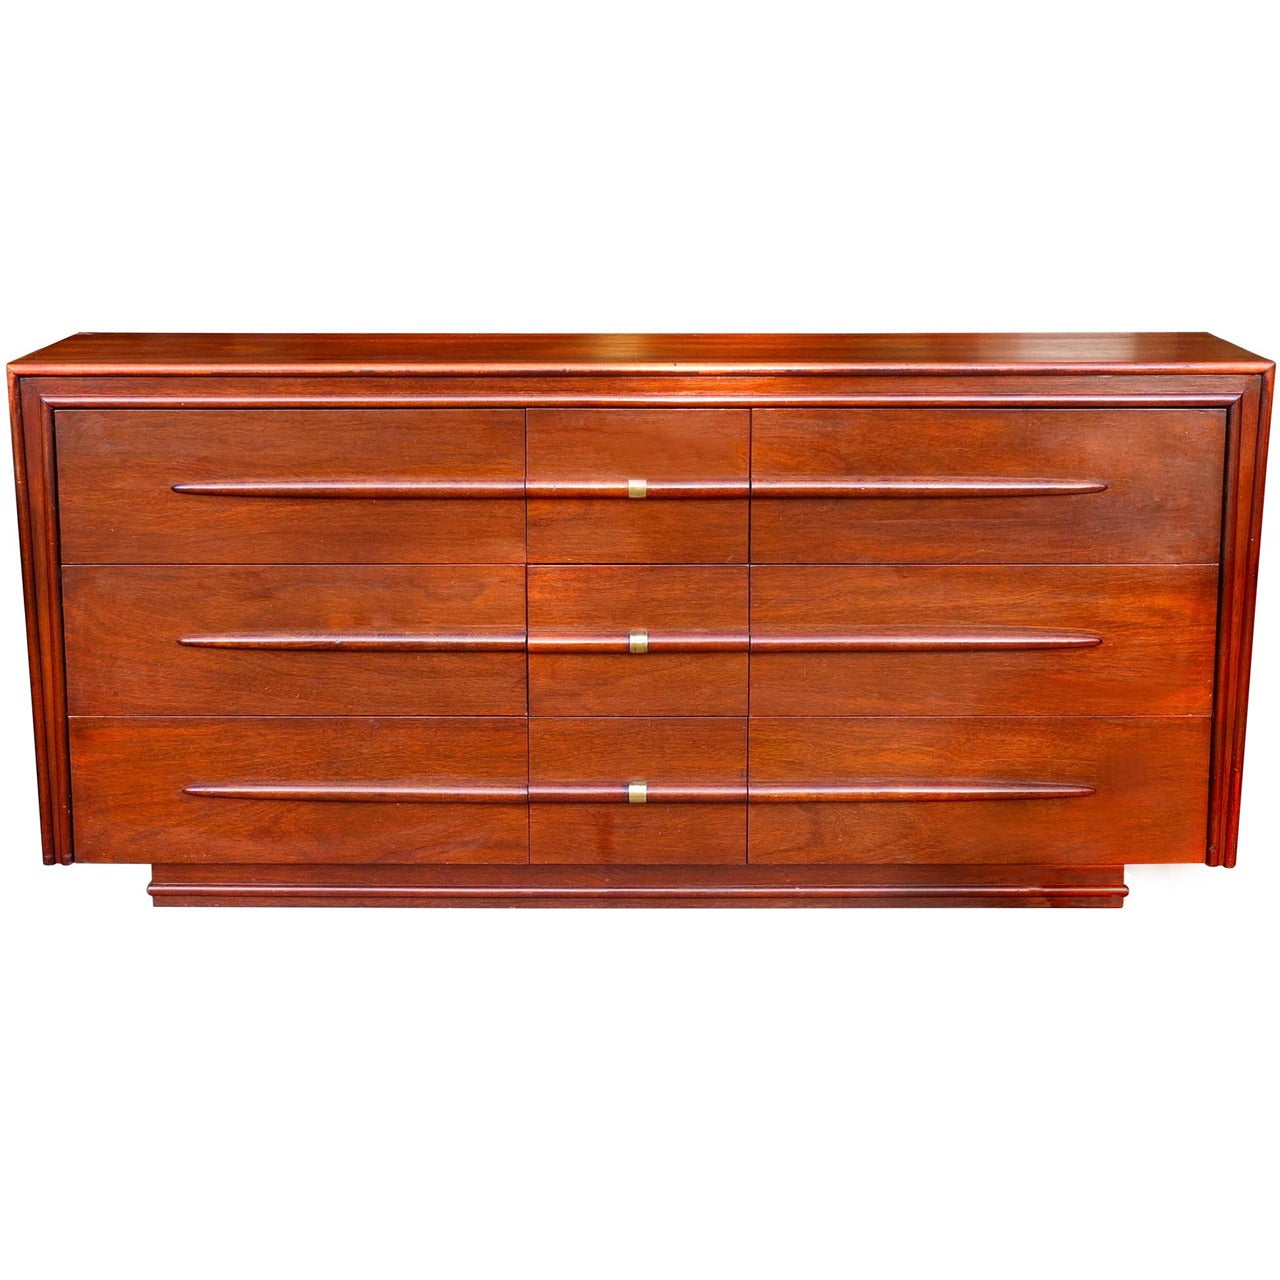 "Viscount" Mahogany Dresser by Wesley Griffin for Gibbard For Sale